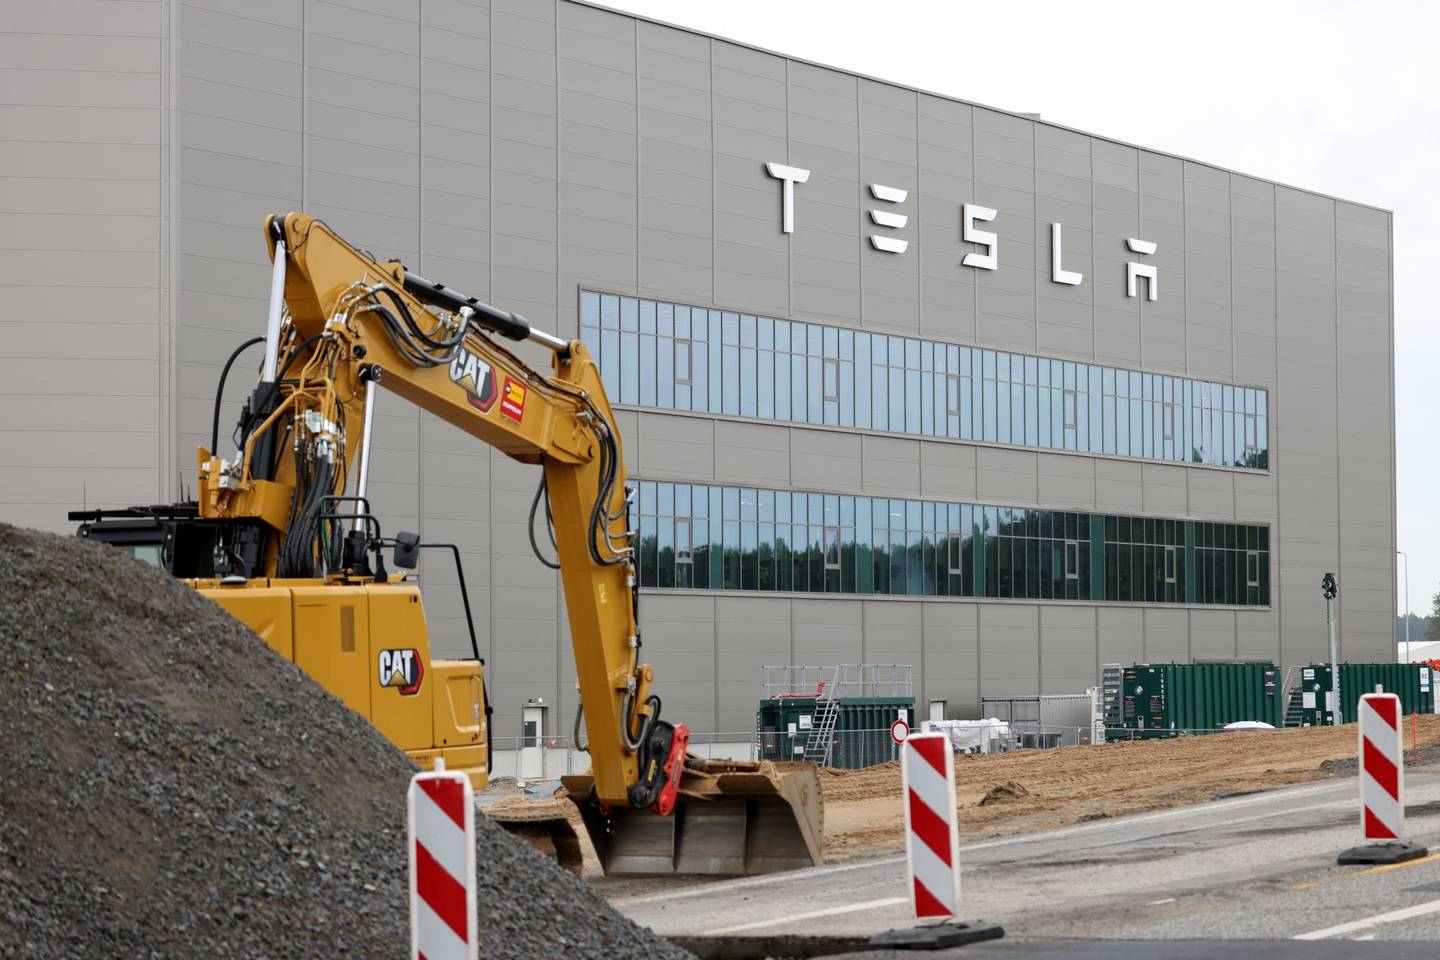 Elon Musk's company plans to accelerate the construction of its factory in Mexico and have it operating by late 2023.